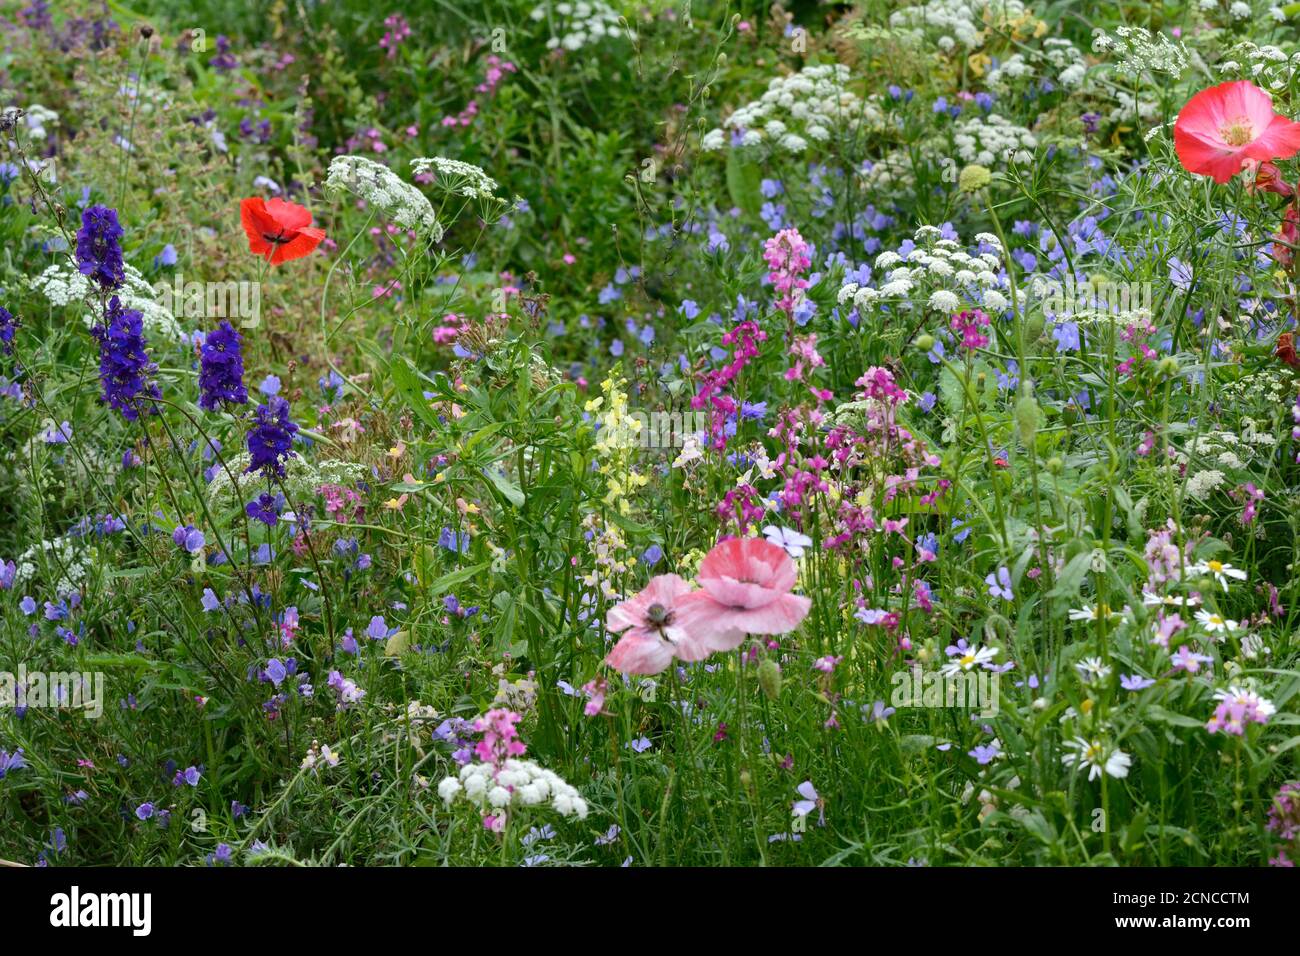 Hardy annual flower bed in a country garden Carmarthenshire Wales Cymry UK Stock Photo